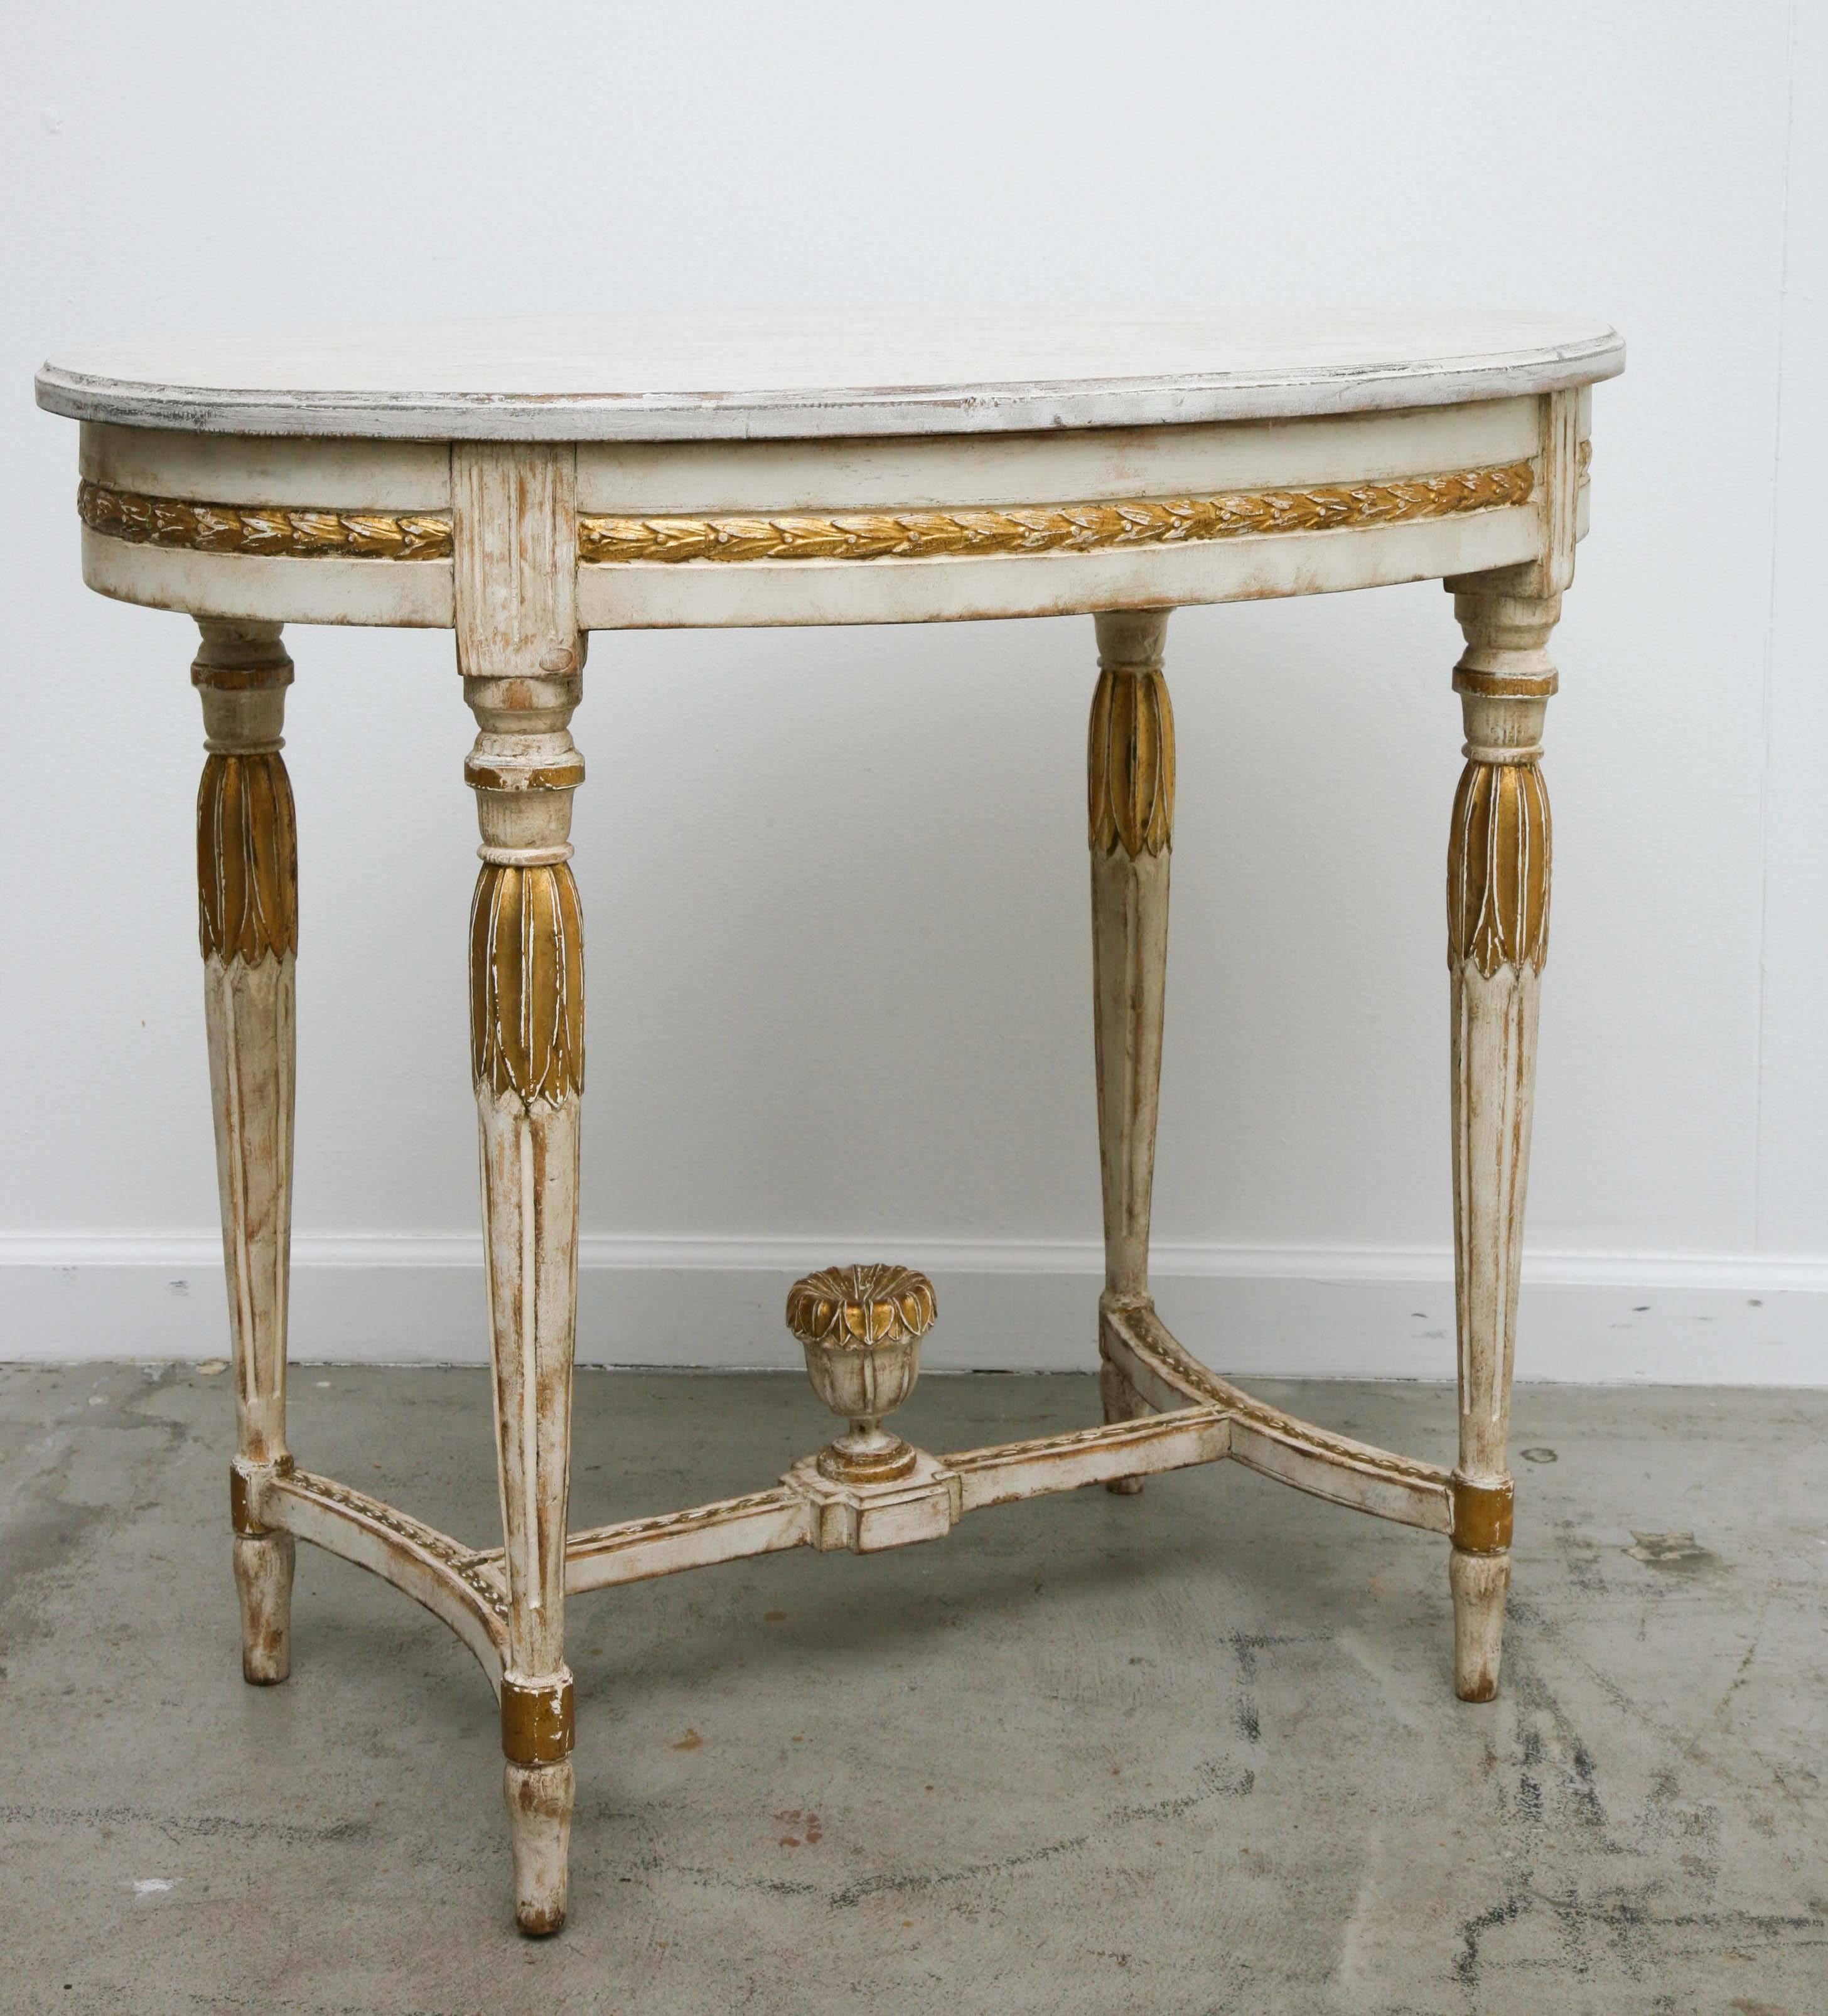 Antique Swedish Period Oval Table, Painted and Gilt Finish, 19th Century 3